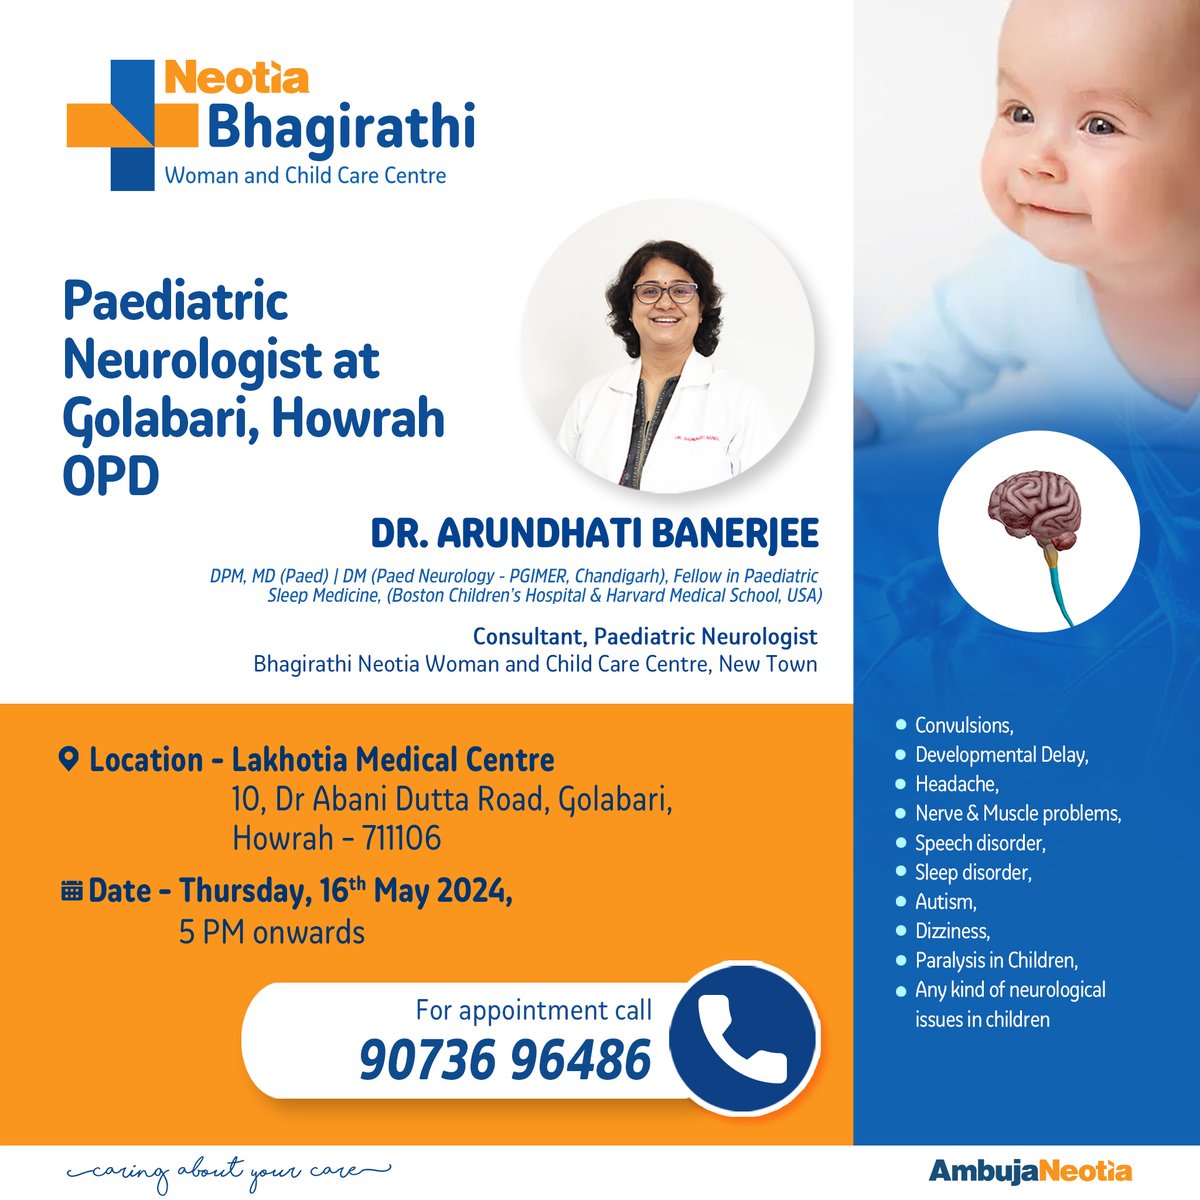 Paediatric Neurologist of #BhagirathiNeotiaWomanandChildCareCentreNewTown will be available on Thursday, 16th May 2024 at Golabari, Howrah.
Contact  : 9073696486
#BNWCCC #CaringAboutYourCare #pediatrics #pediatric #neurochild #howrahclinic #childcare #healthcare #AmbujaNeotia